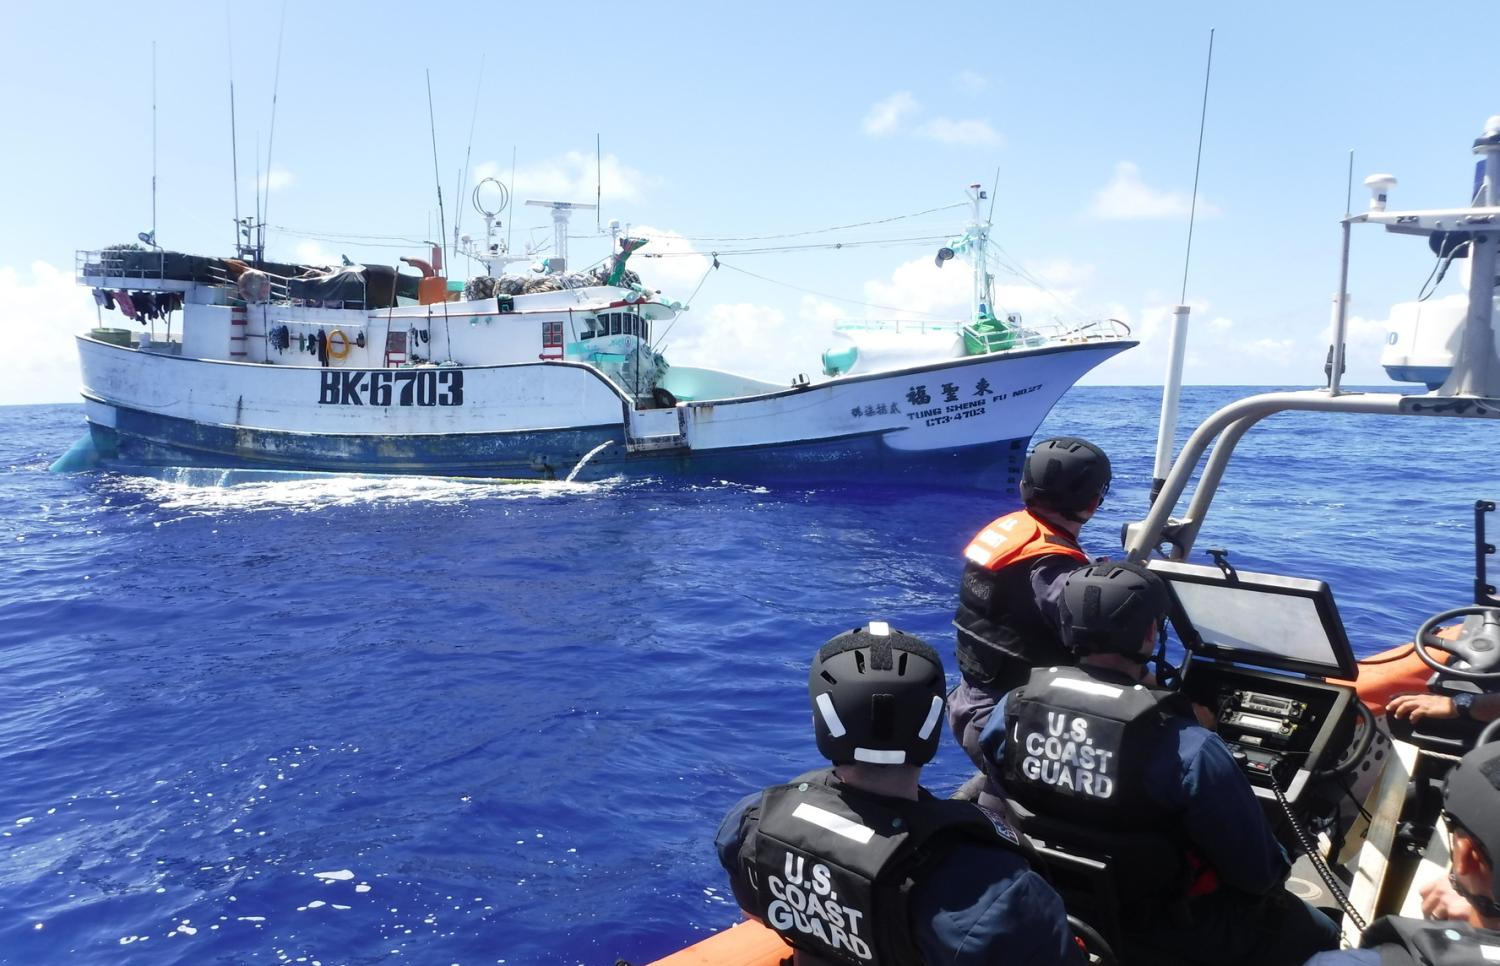 A boarding team from the United States Coast Guard Cutter Sequoia (WLB 215) approaches a Taiwanese fishing vessel in the Pacific Ocean, March 13, 2020. The crew undertook a fisheries patrol as part of joint efforts for Operation Rai Balang under the Forum Fisheries Agency. (U.S. Coast Guard photo by USCGC Sequoia/Released)